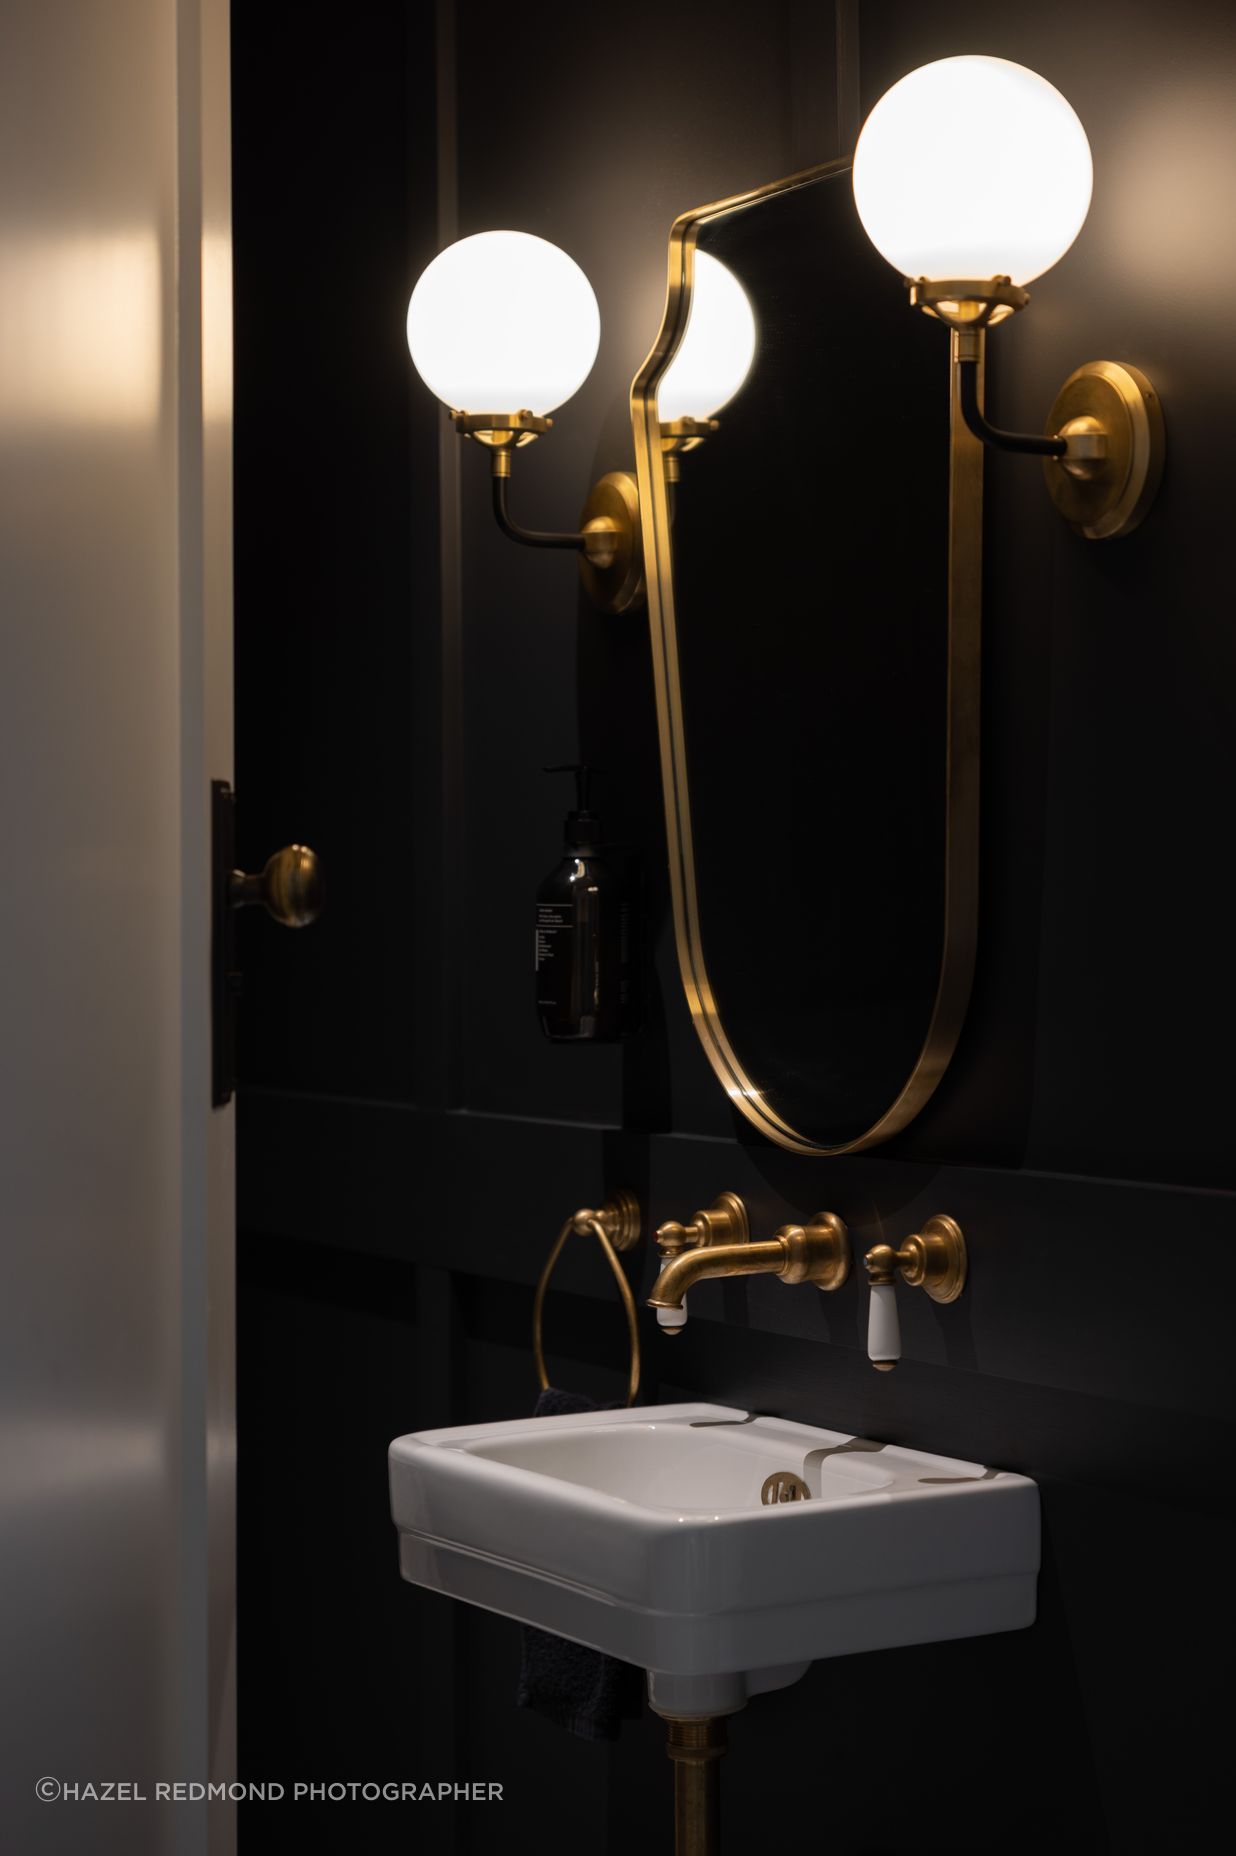 Gold accents add a luxurious feel to the bathrooms.